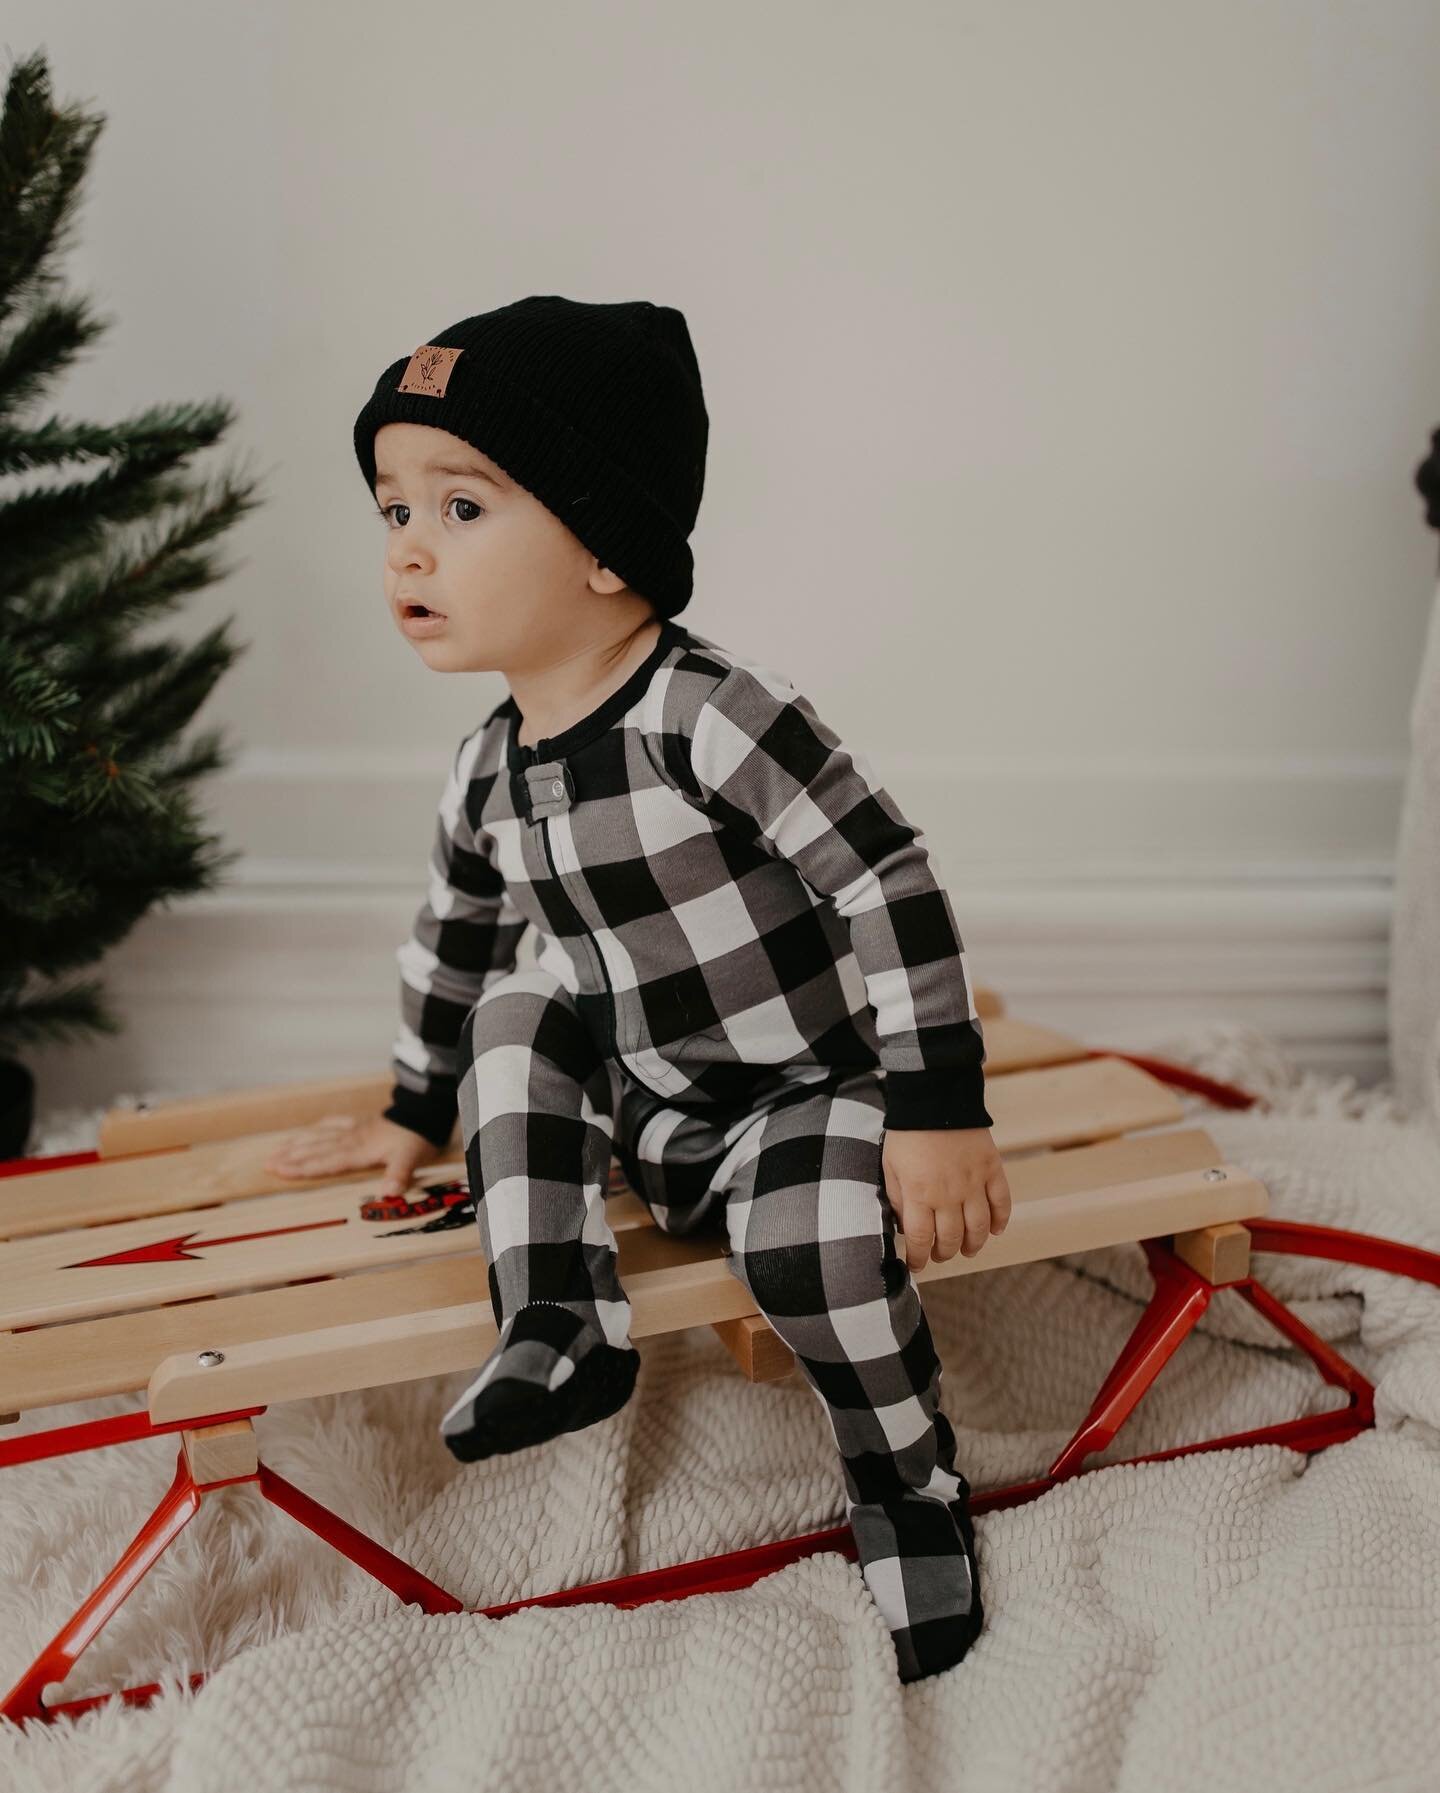 *Announcement* Our Shop will be closed from December 19 January 3rd to enjoy time with our family (and snuggle the cutest little man ever). 
⠀⠀⠀⠀⠀⠀⠀⠀⠀
Make sure your orders are in before the 19th of December!
Wishing you all the merriest Christmas of